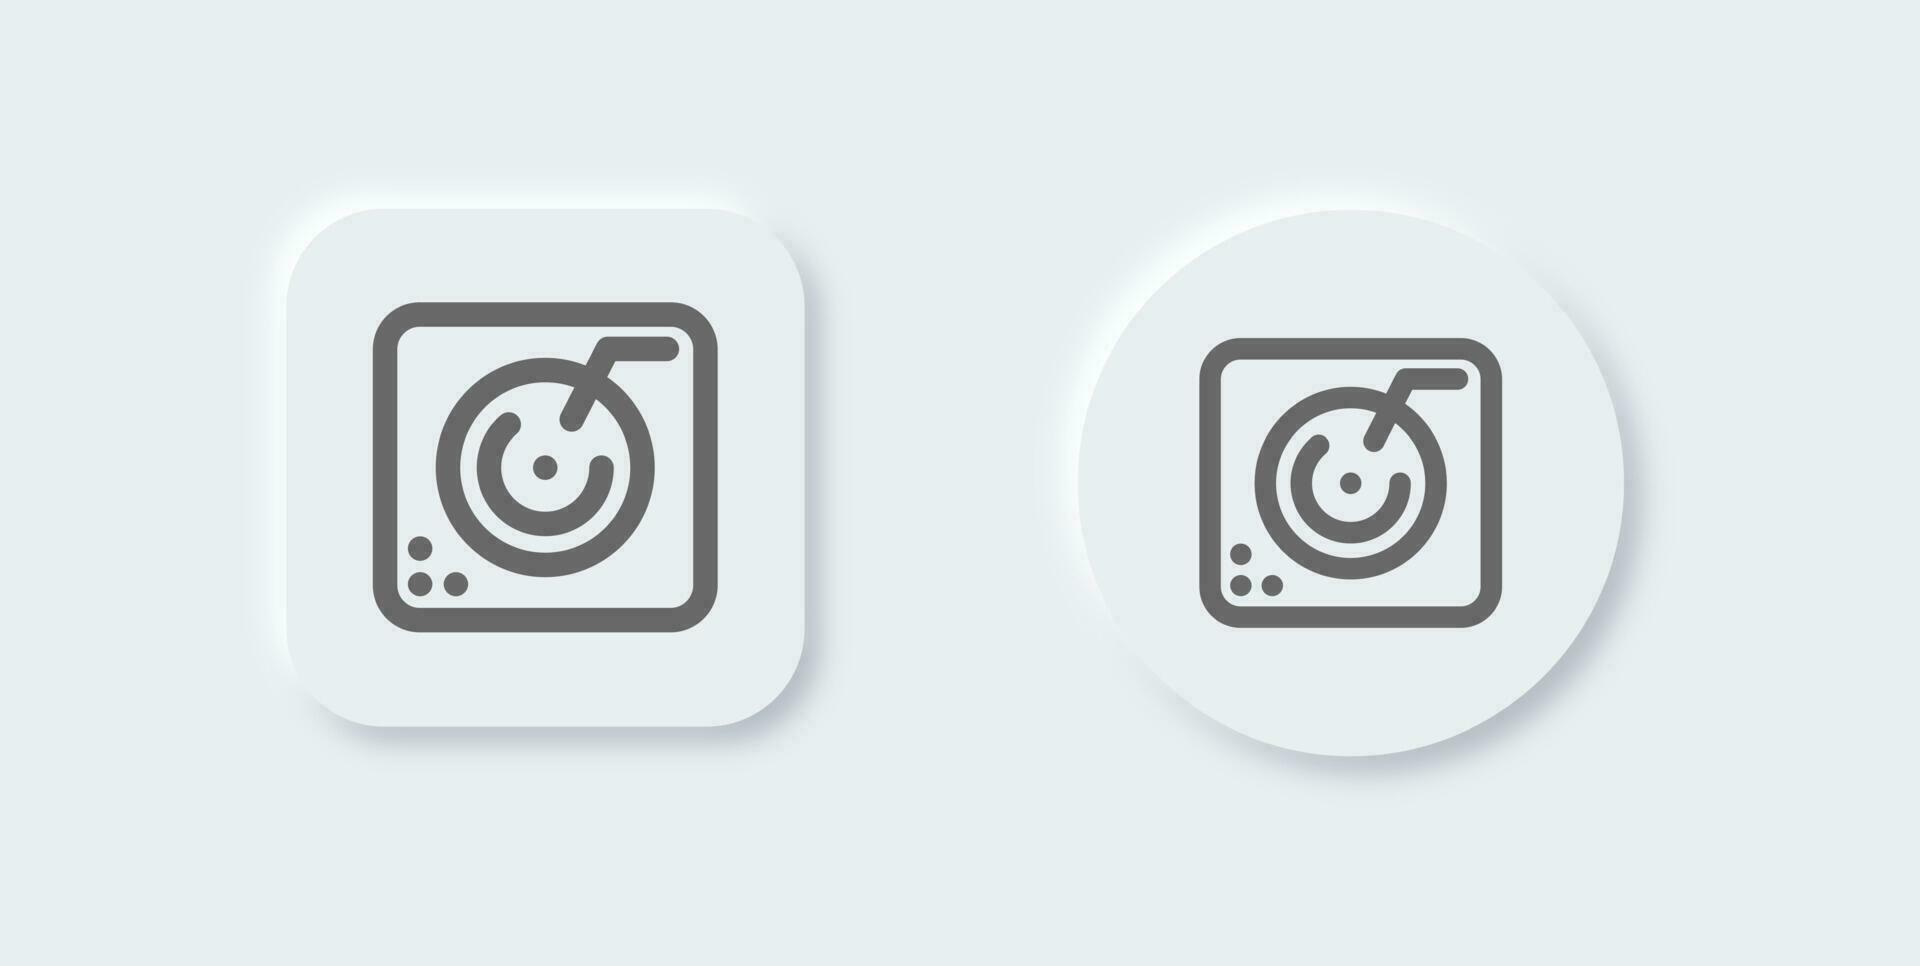 Turntable line icon in neomorphic design style. Dj signs vector illustration.